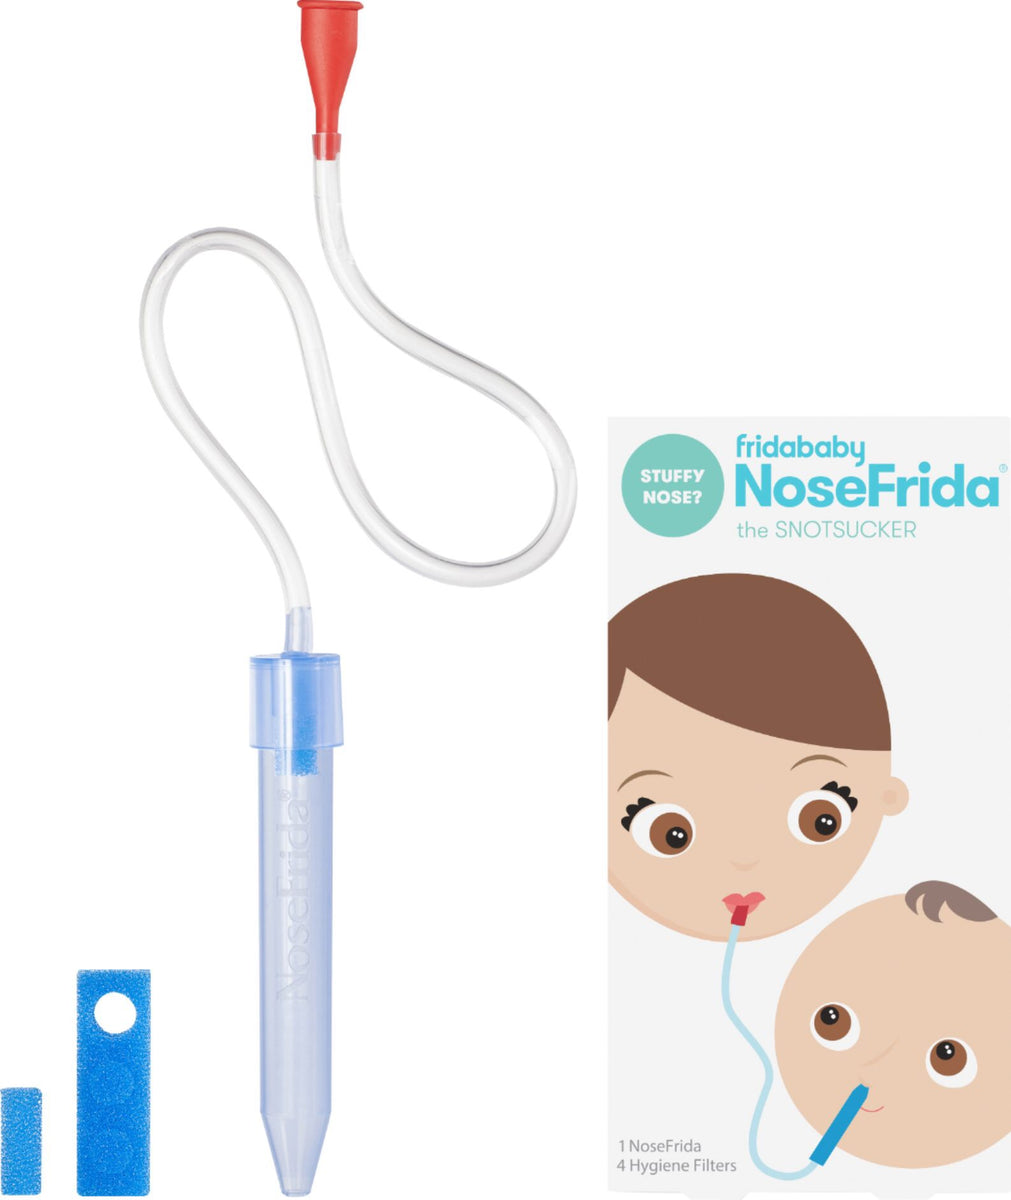 NoseFrida Filter - The Care Connection